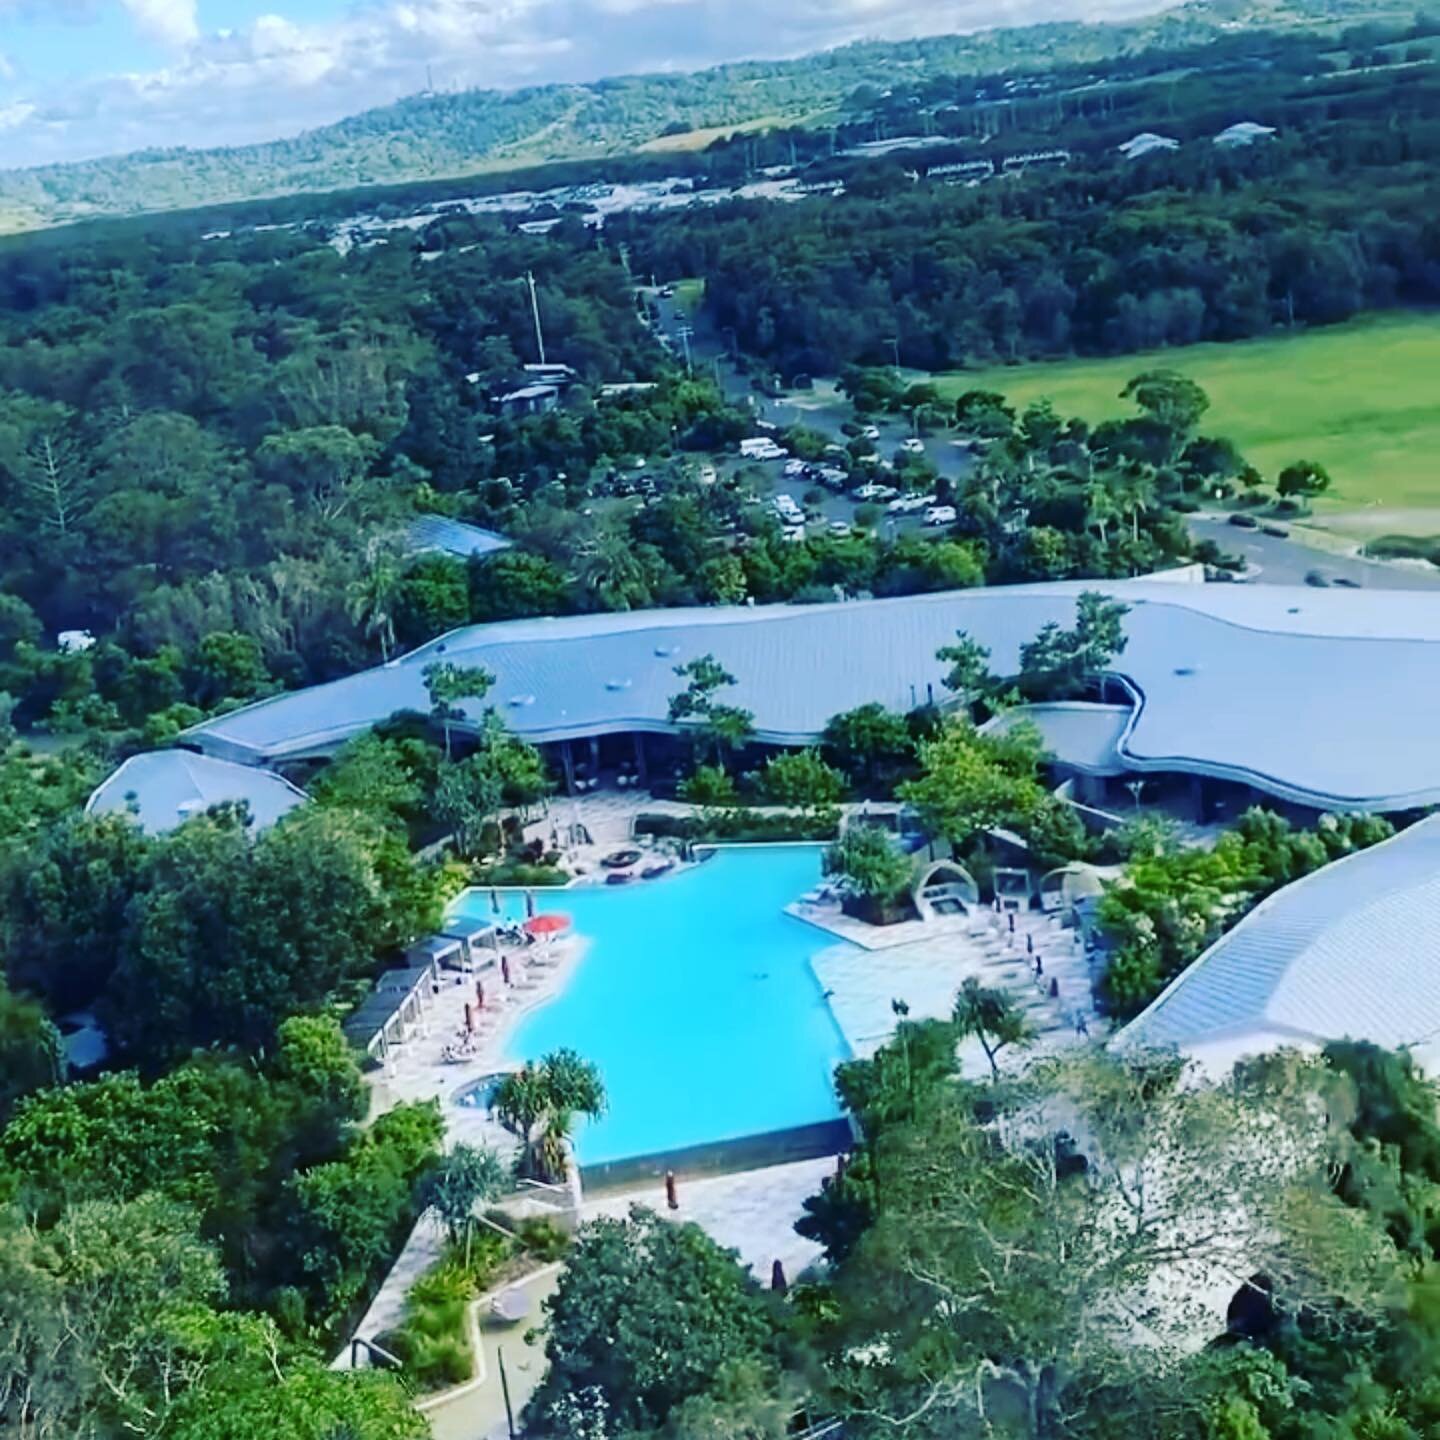 Join me here at the most magical resort. The land is sacred, it&rsquo;s special and that&rsquo;s why @elementsofbyron has created a resort like no other.
I&rsquo;ve worked here for over 5 years and this August I&rsquo;ll be running a retreat.
August 